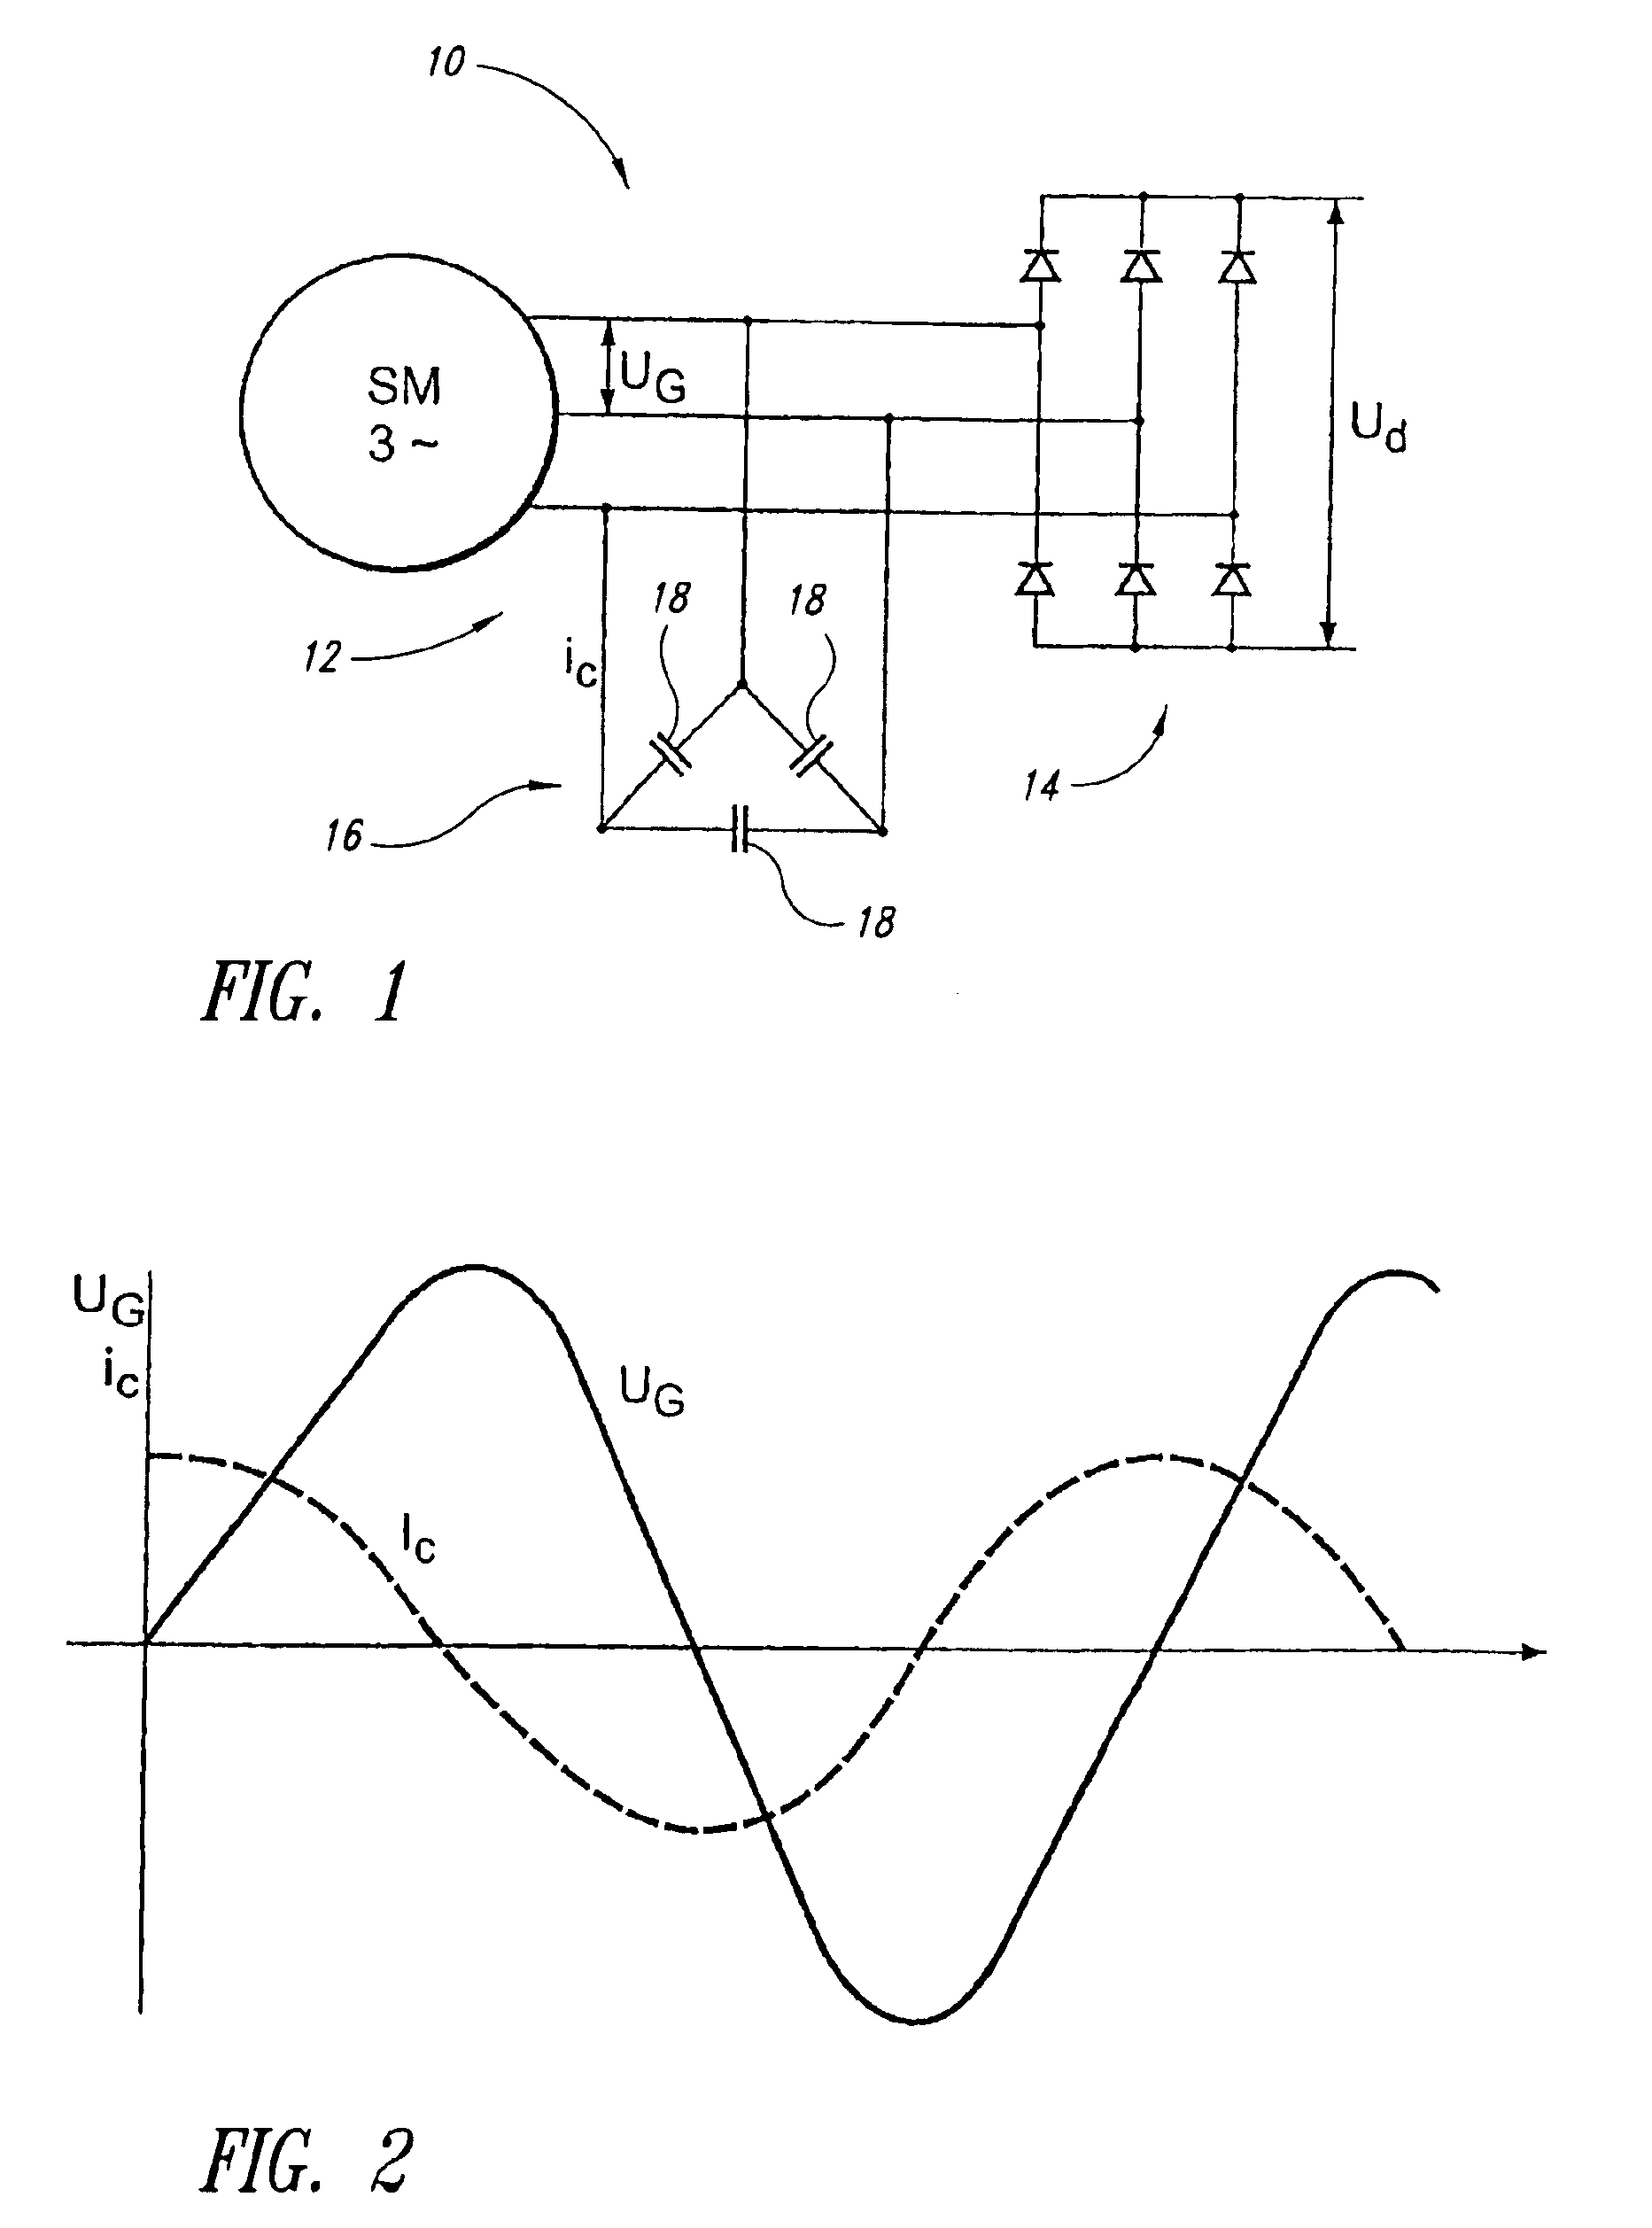 Ring generator for a wind power installation